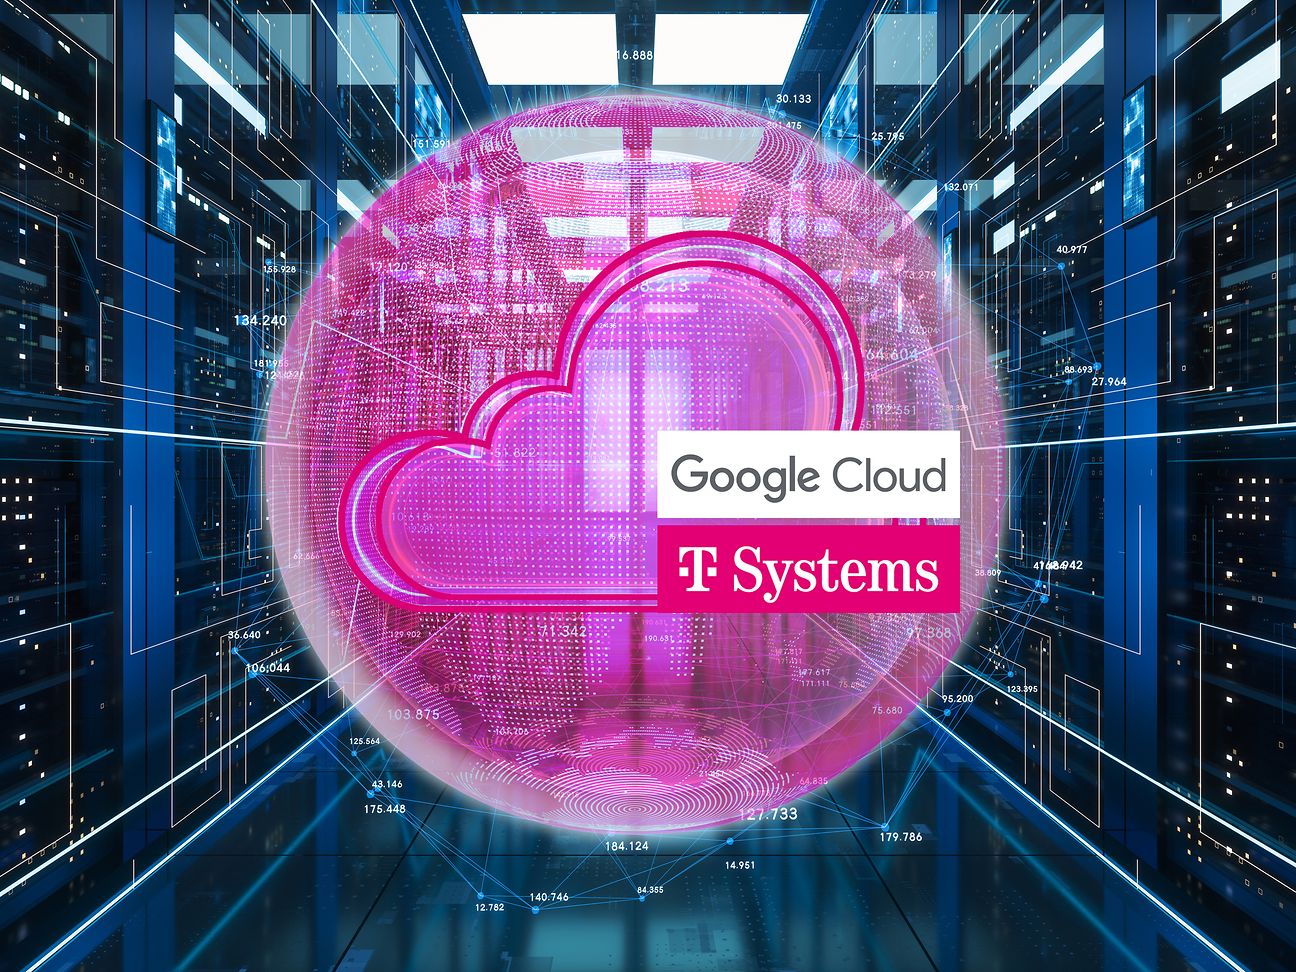 service press | & and Expansion: distribution in Google European Germany Cloud EuropaWire.eu Cloud T-Systems The Secure Union\'s Hosting Disconnected newswire Offer release |